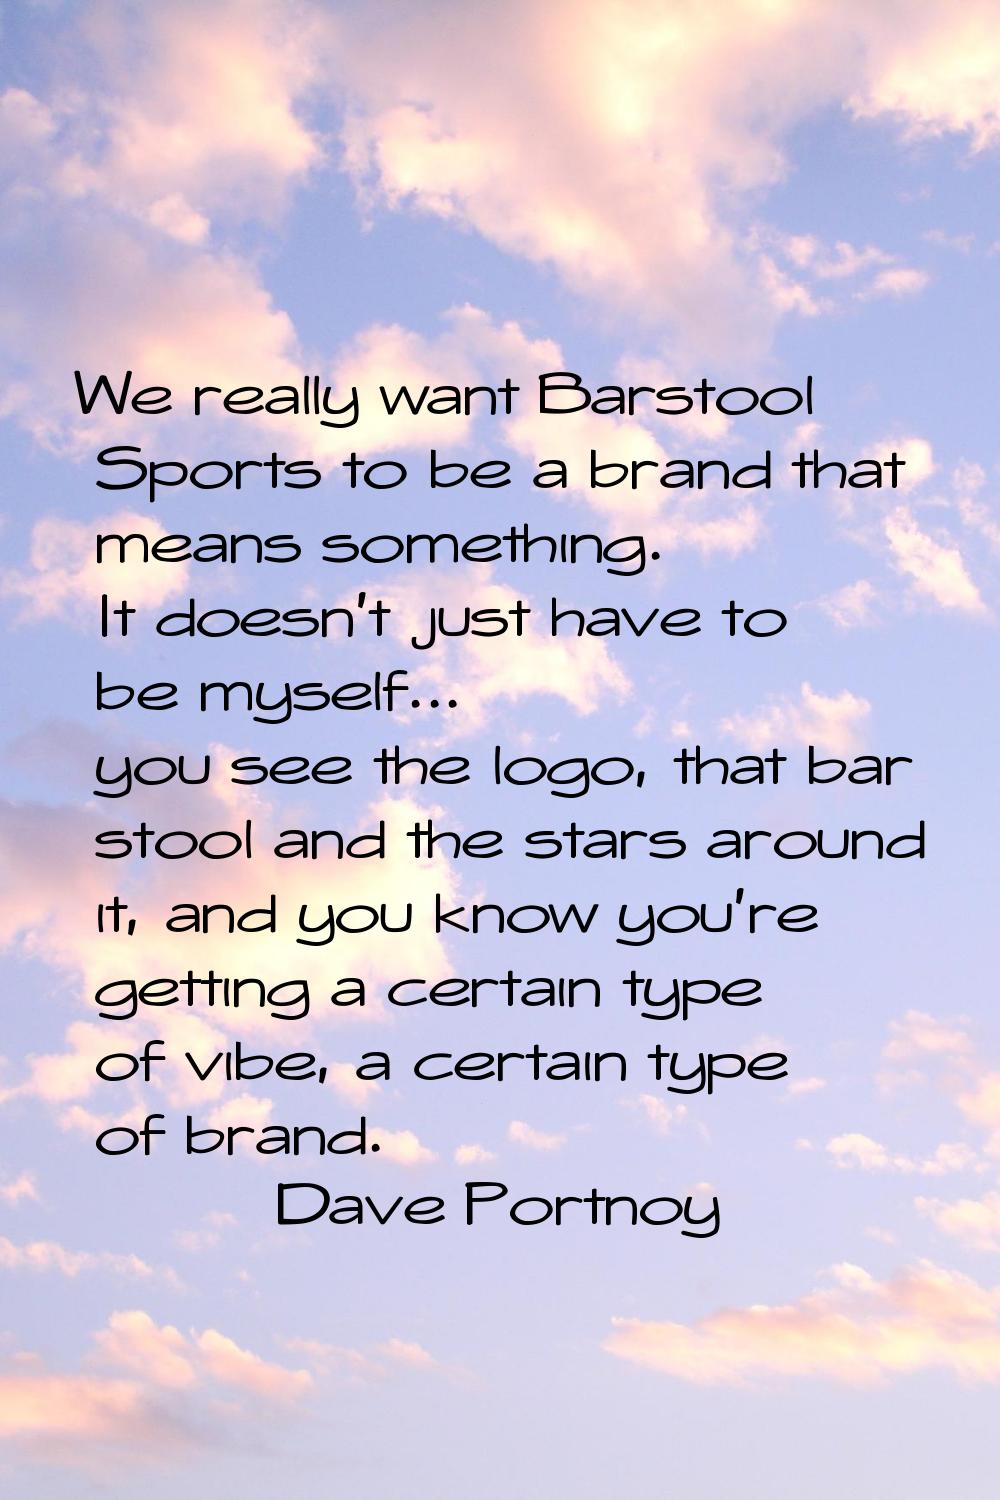 We really want Barstool Sports to be a brand that means something. It doesn't just have to be mysel